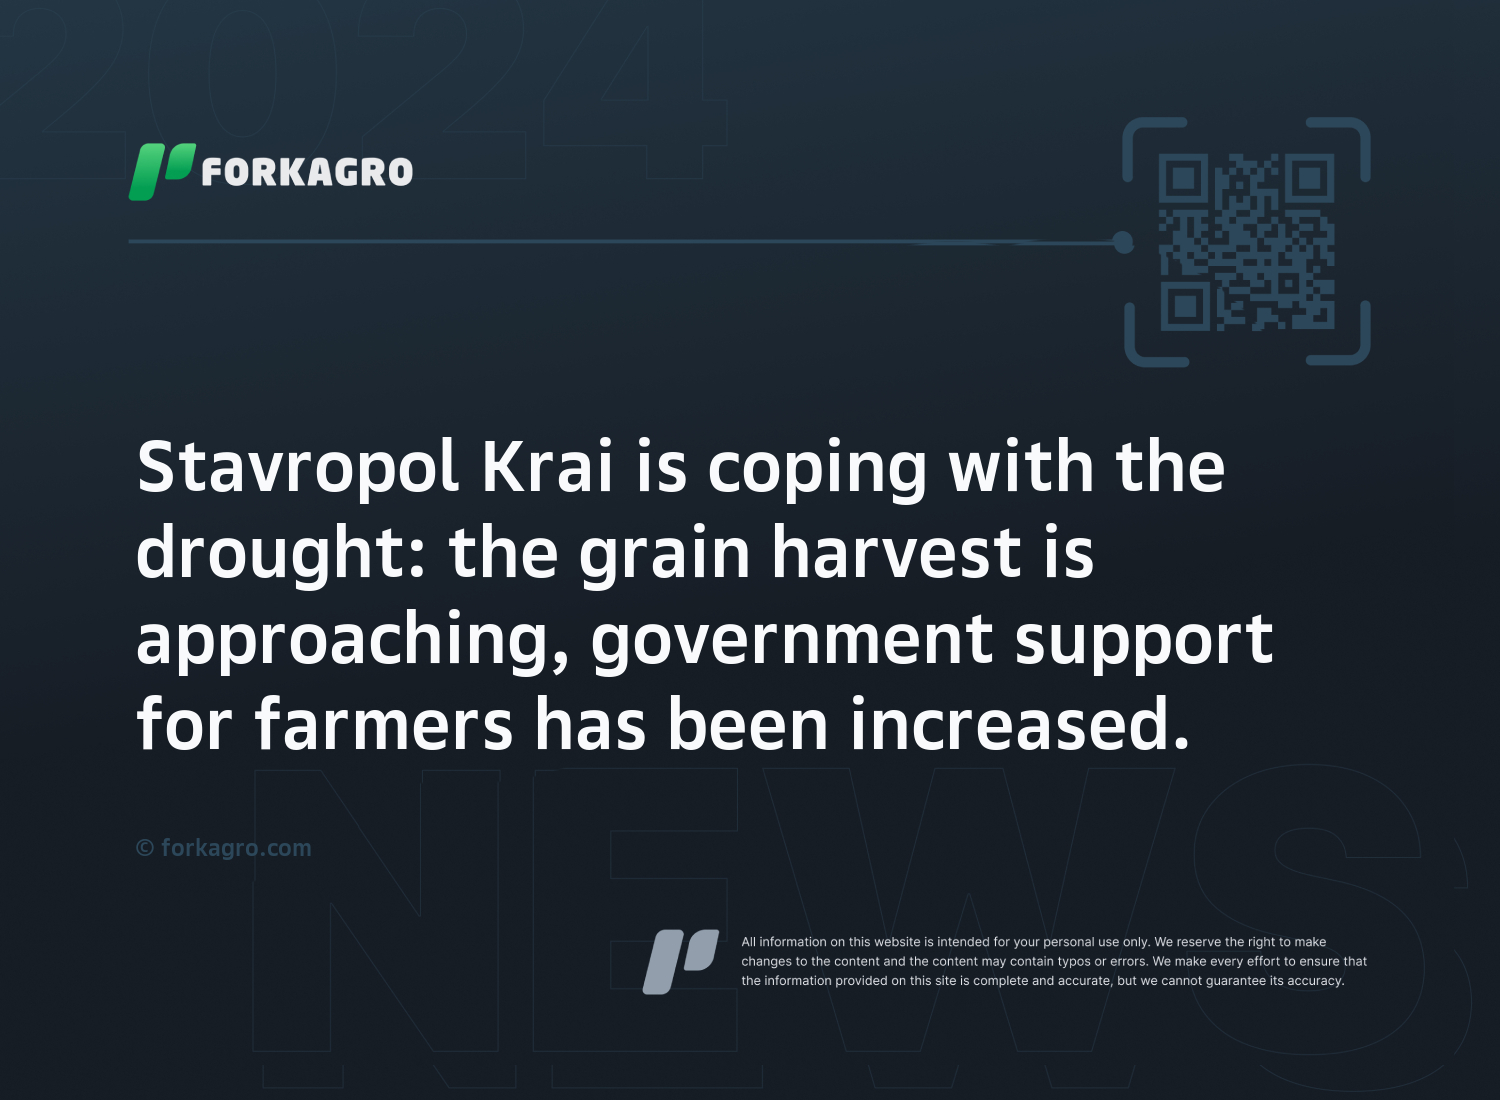 Stavropol Krai is coping with the drought: the grain harvest is approaching, government support for farmers has been increased.